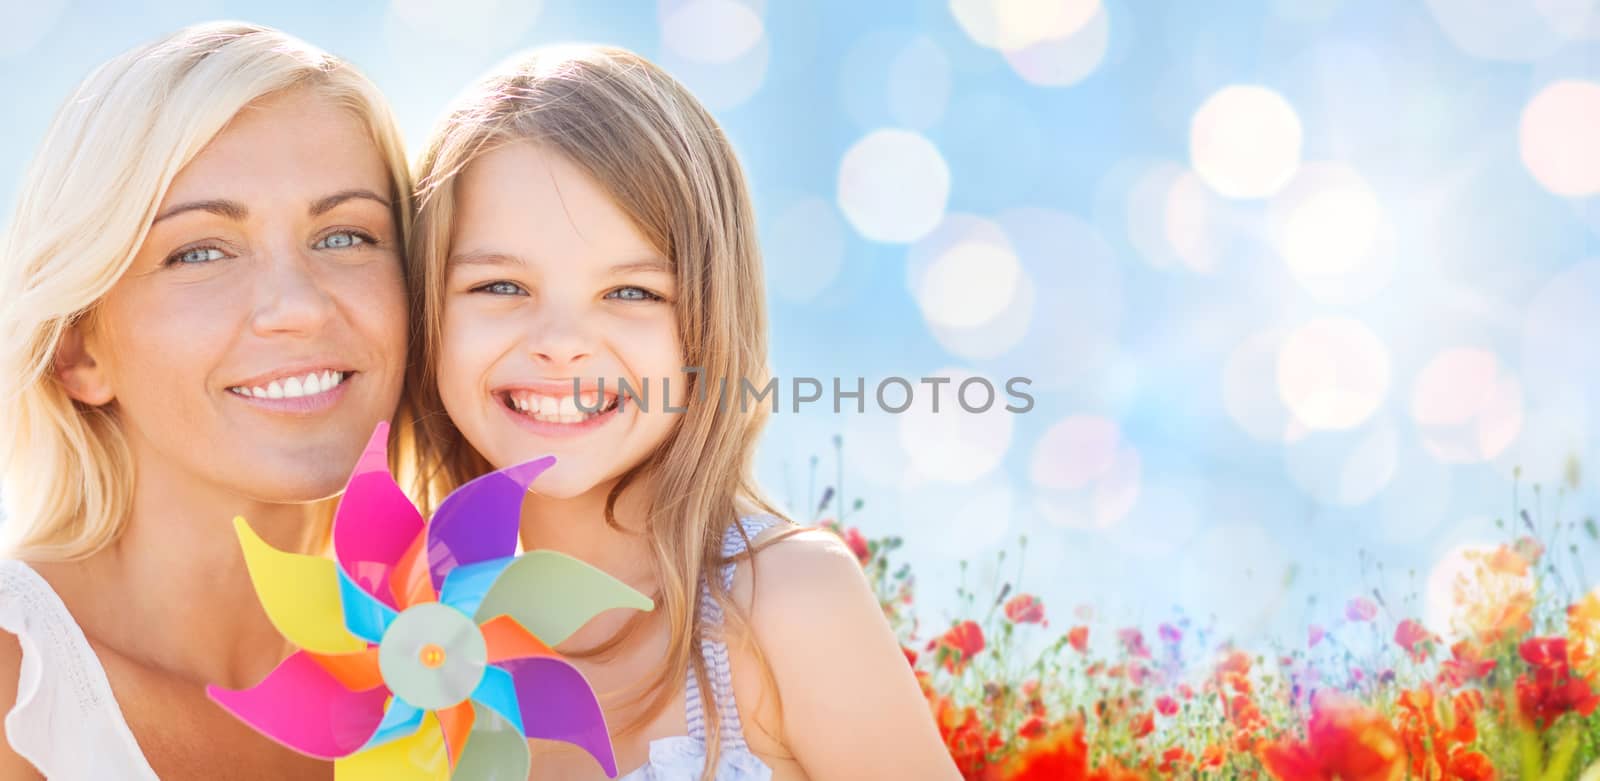 summer holidays, family, children and people concept - happy mother and girl with pinwheel toy over blue lights and poppy field background